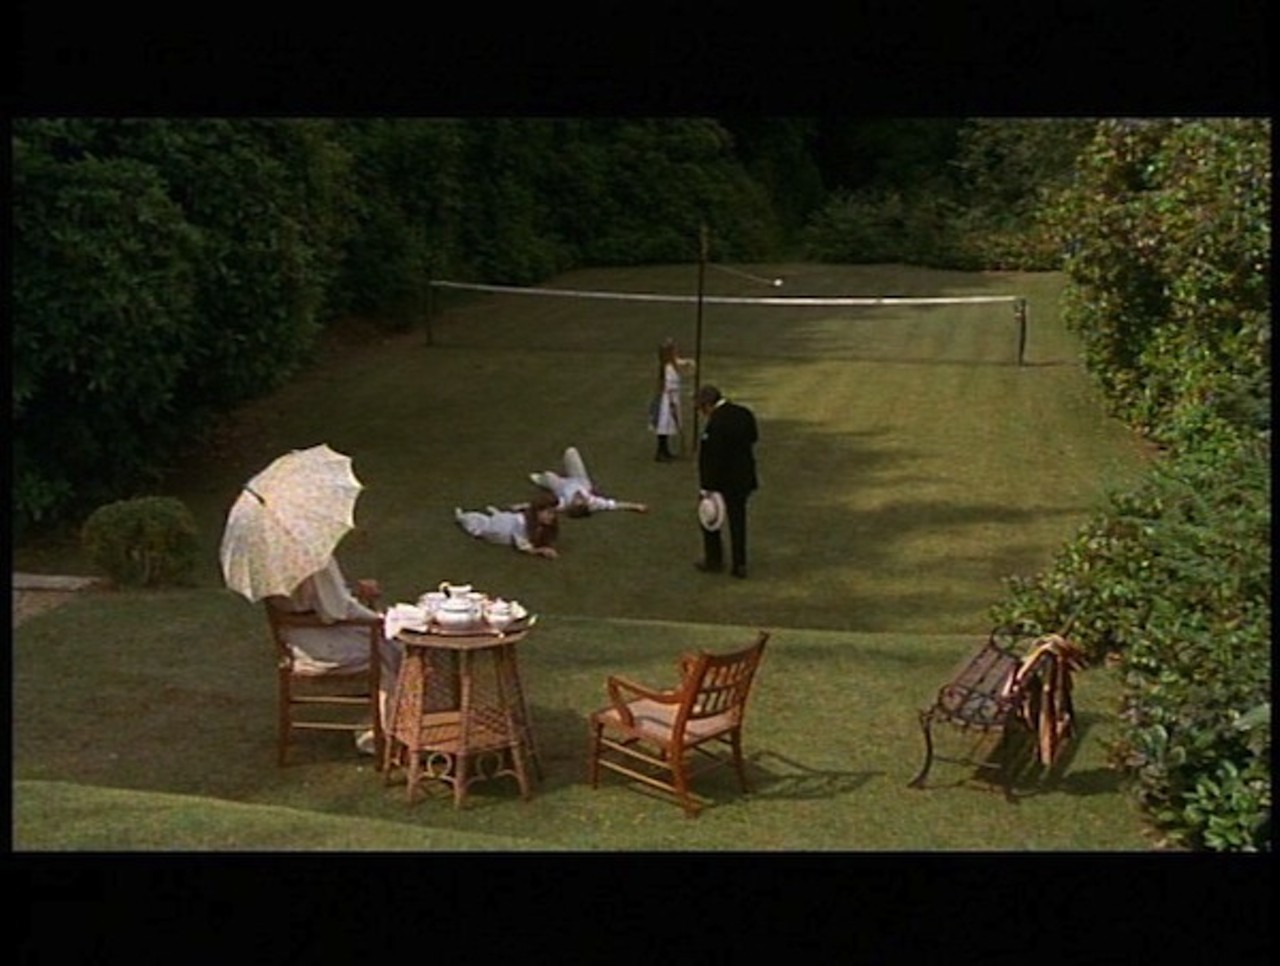 More than 25 years after its theatrical release, A Room With a View still tops lists of Most Romantic Films of all time. Its depiction of Edwardian English summer, full of tea and tennis and skinny-dipping (yes), remains a favorite as well.